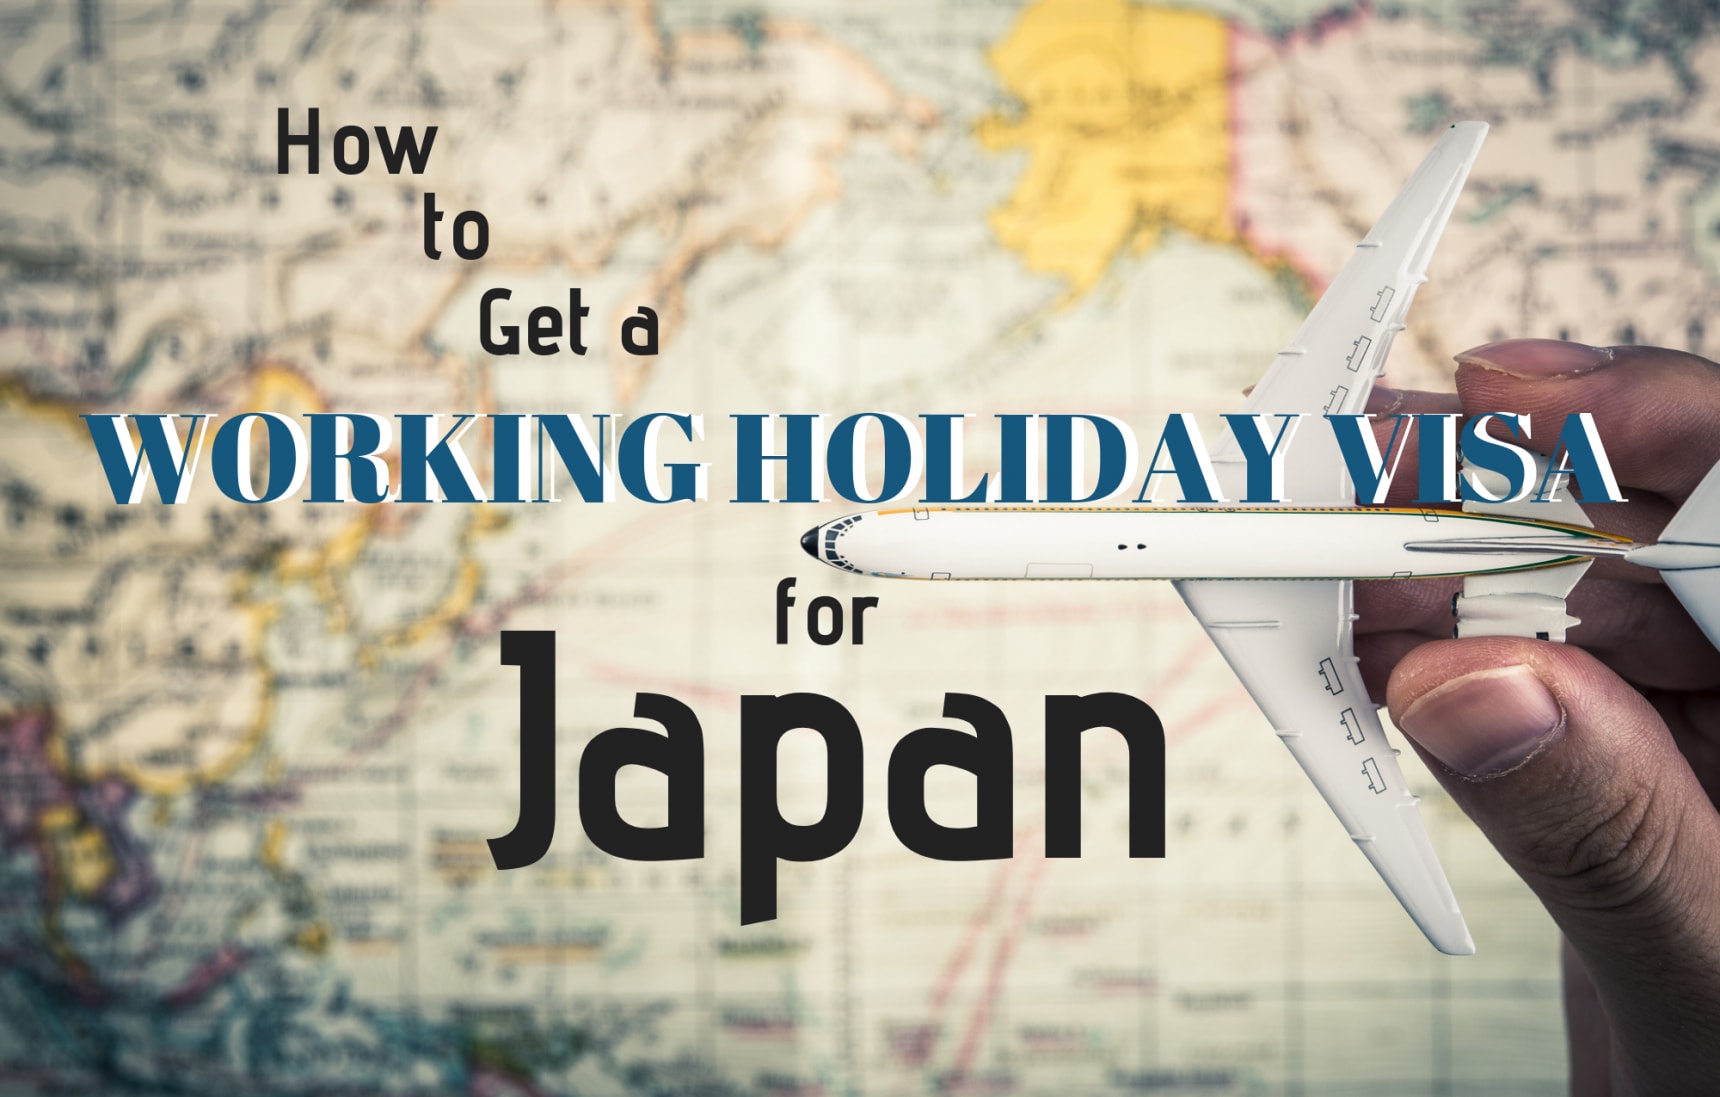 How to Get a Working Holiday Visa for Japan